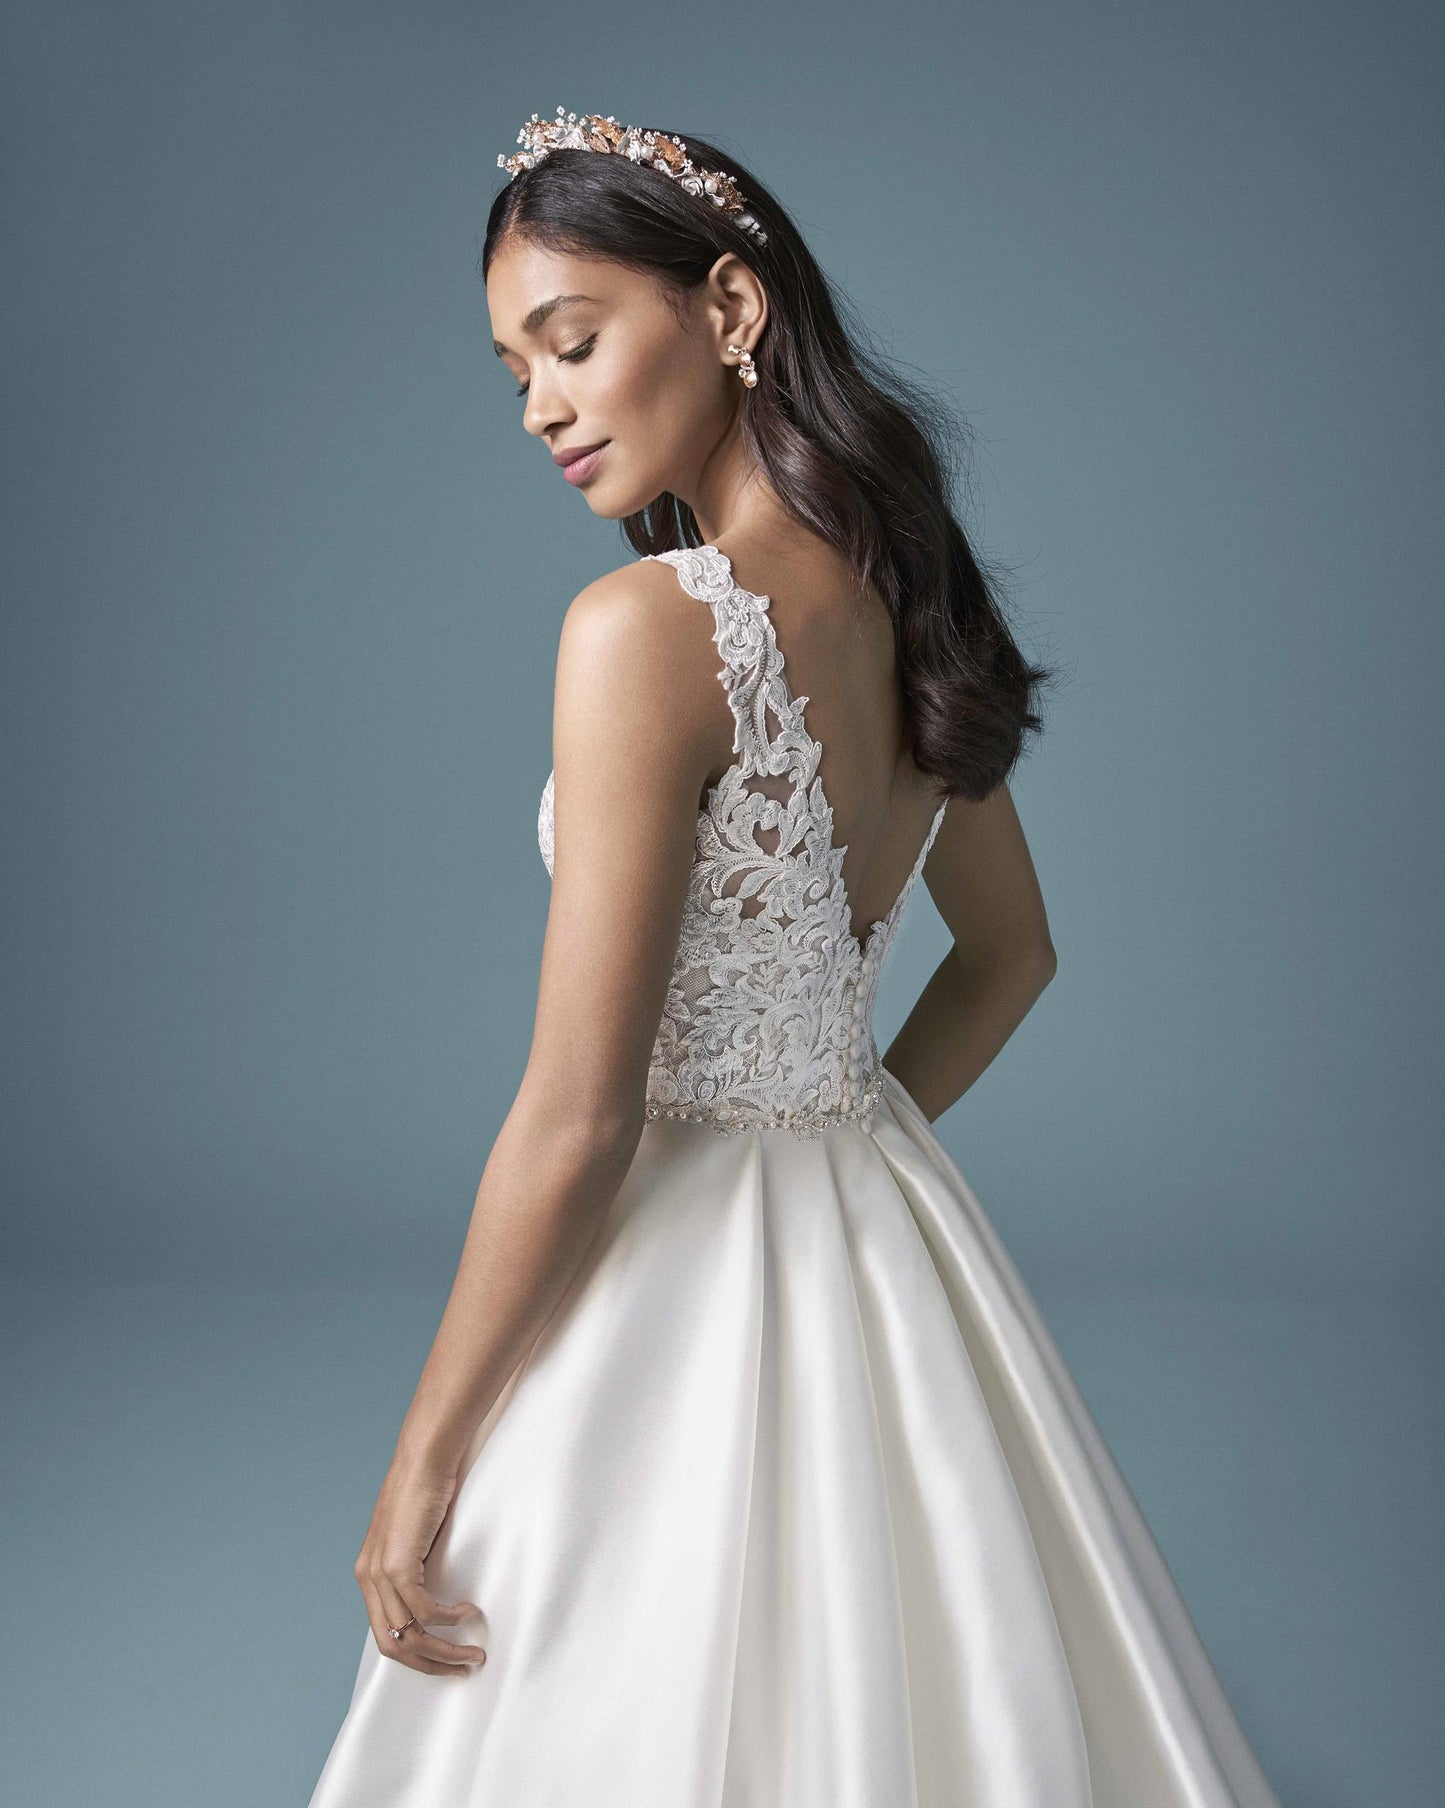 "Sonnet" A-Line Minimalistic Wedding Dress by Maggie Sottero